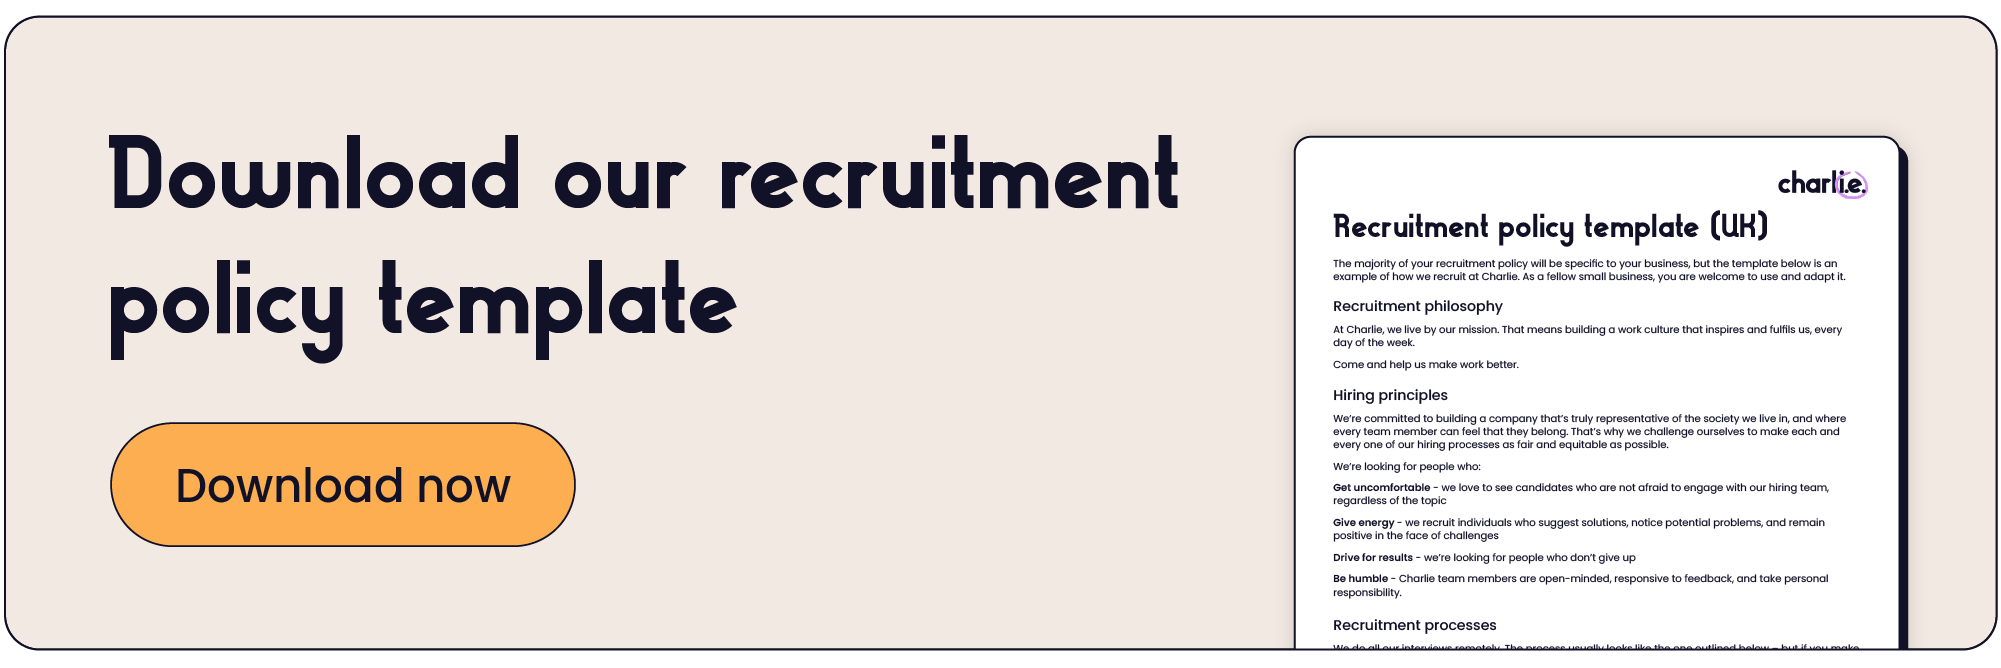 Download our recruitment policy template-01.webp